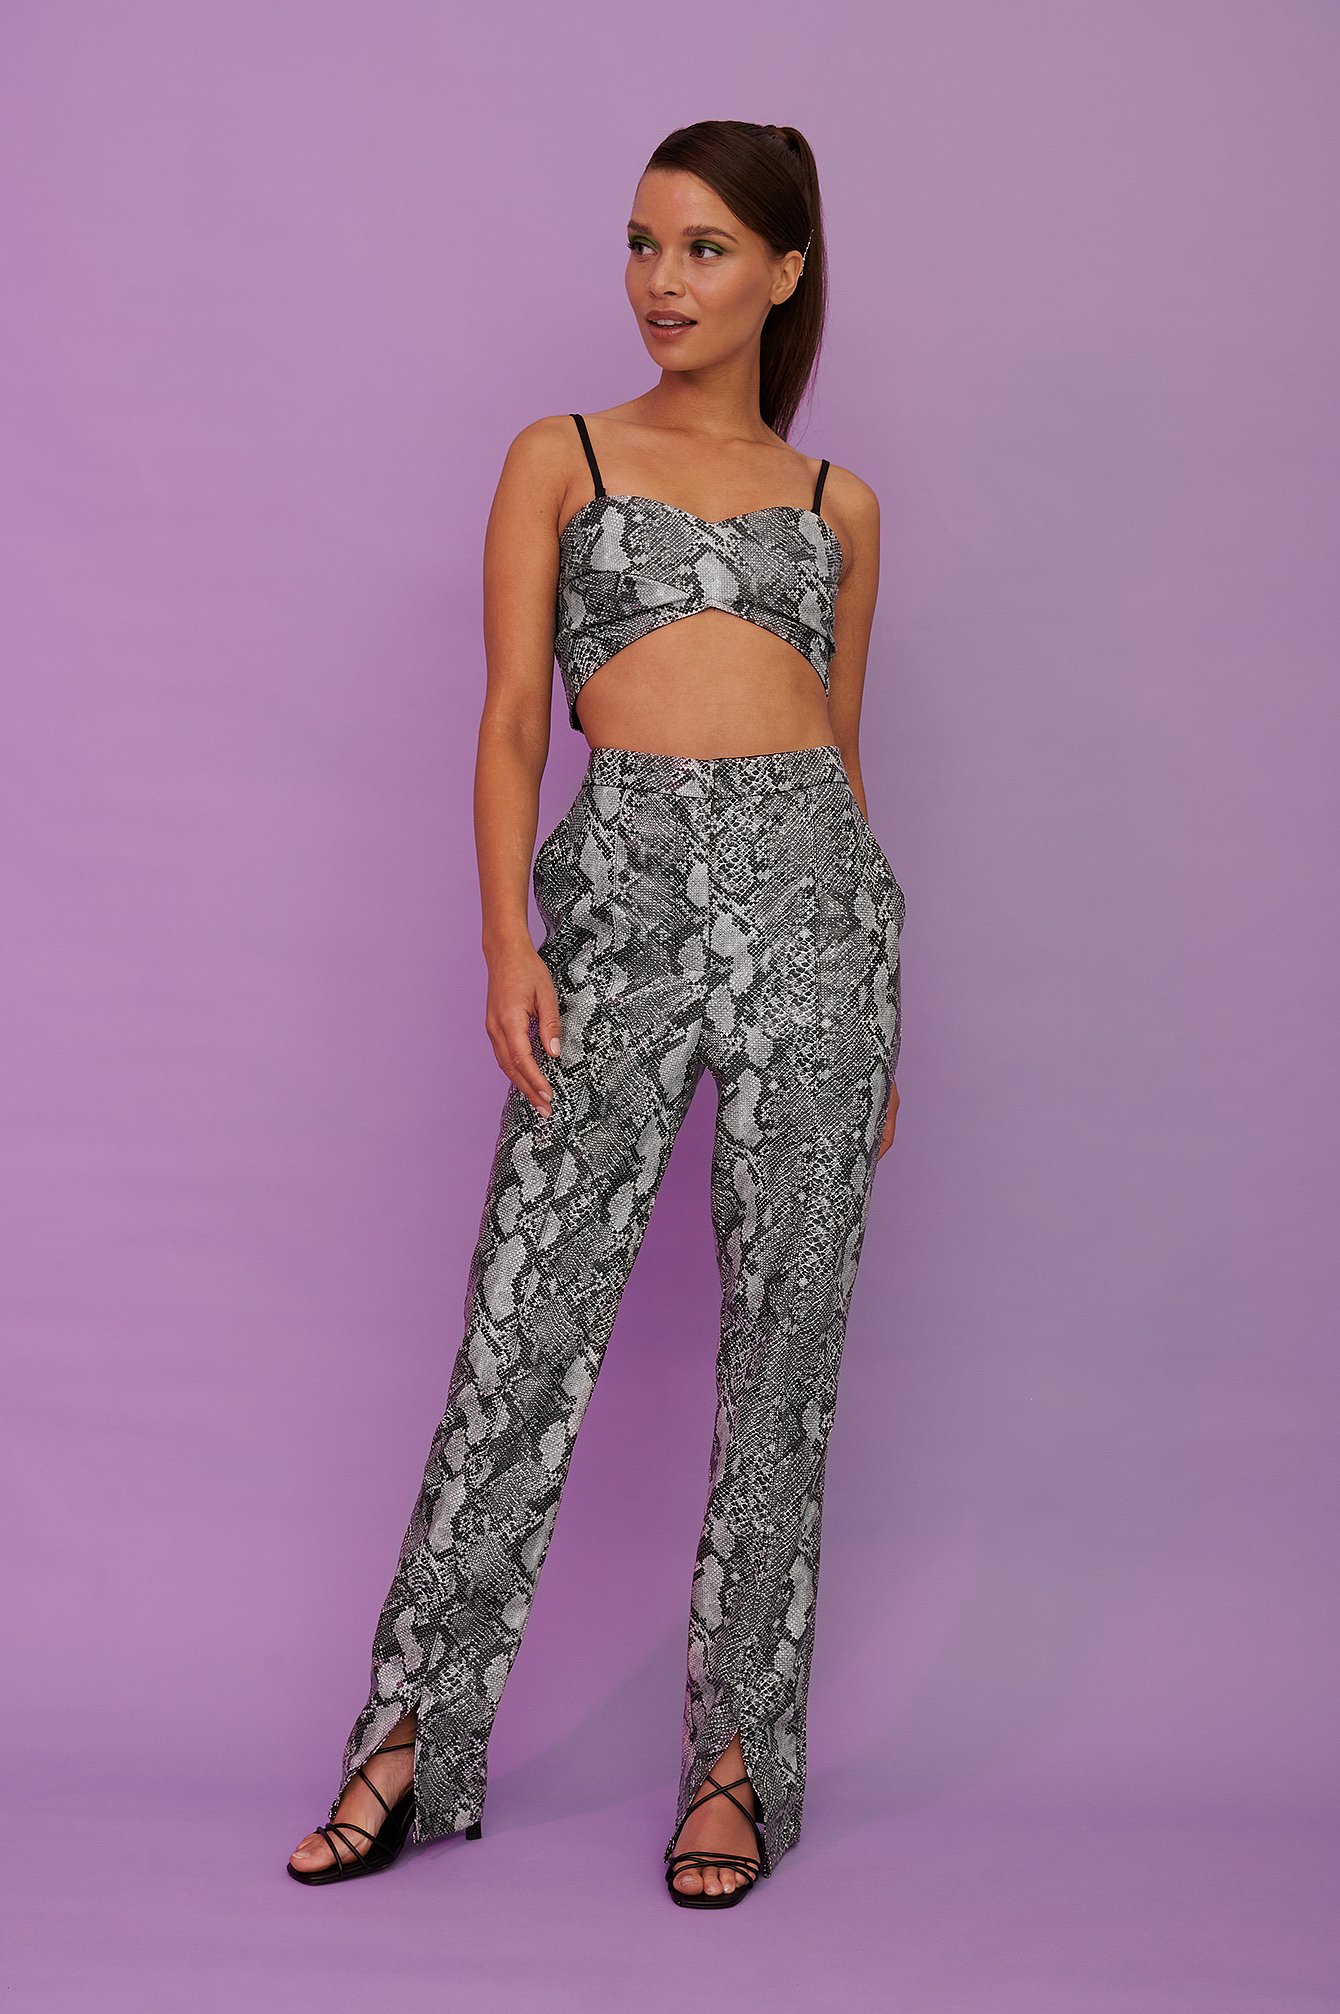 Cropped Snake Top Outfit